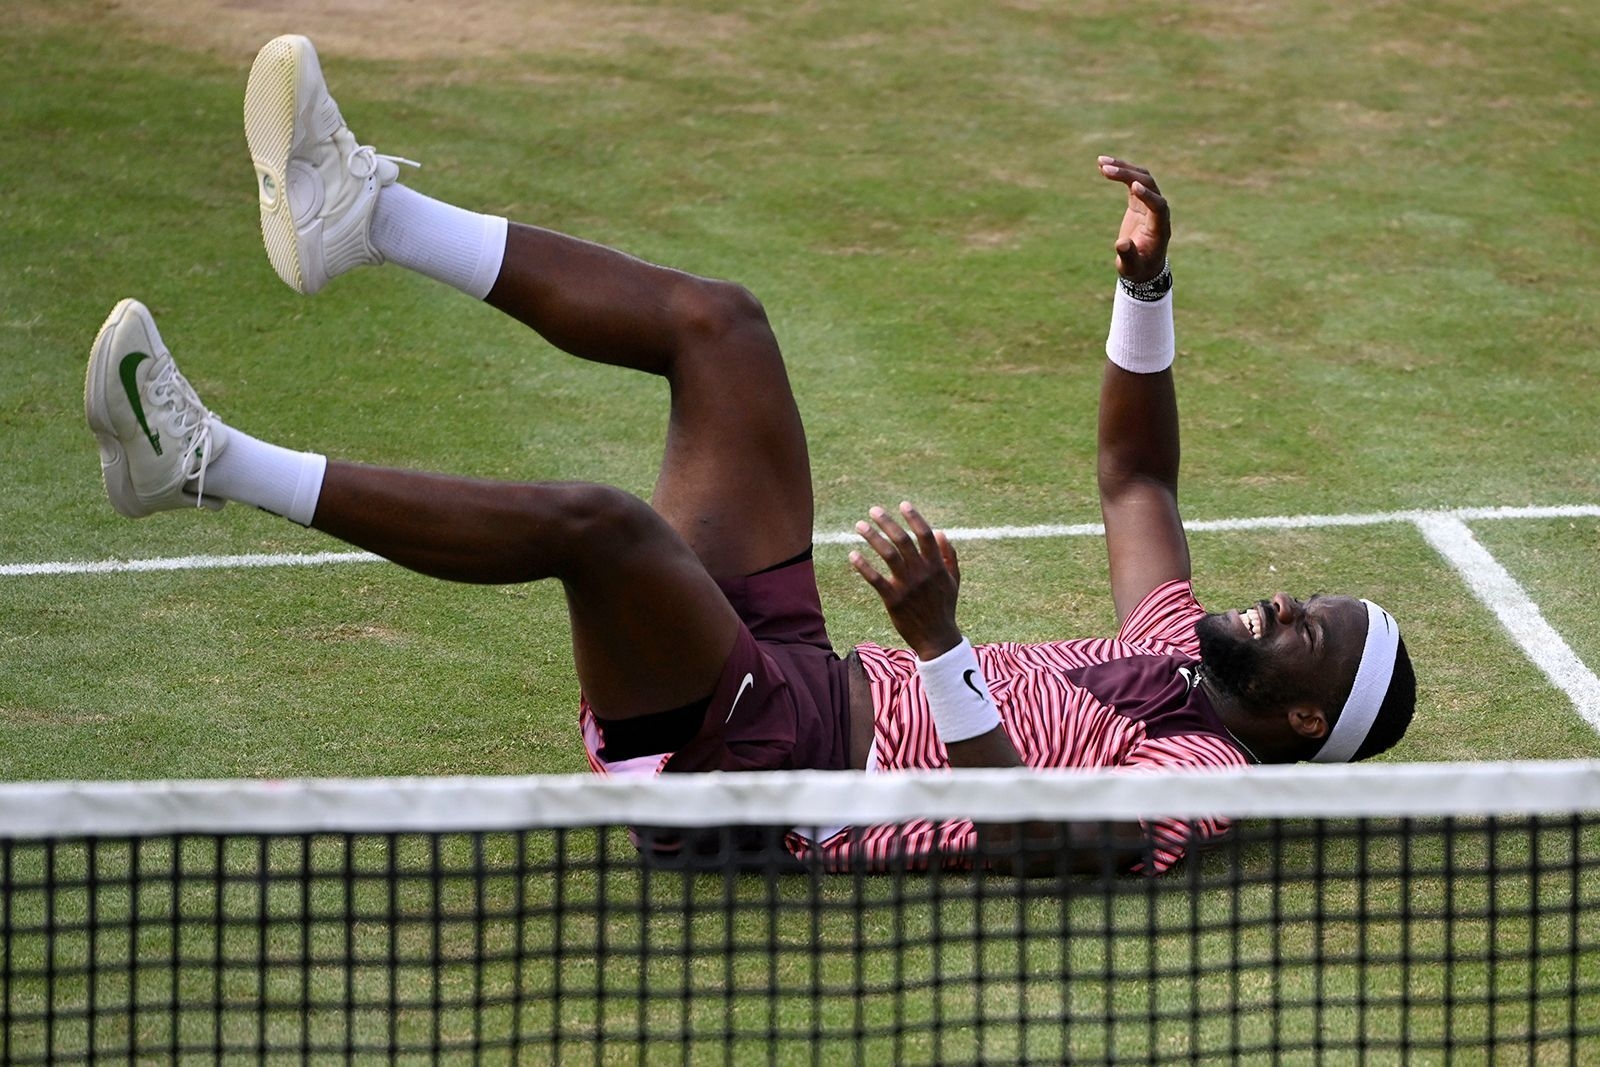 Tiafoe fell to the floor in celebration after winning match point.